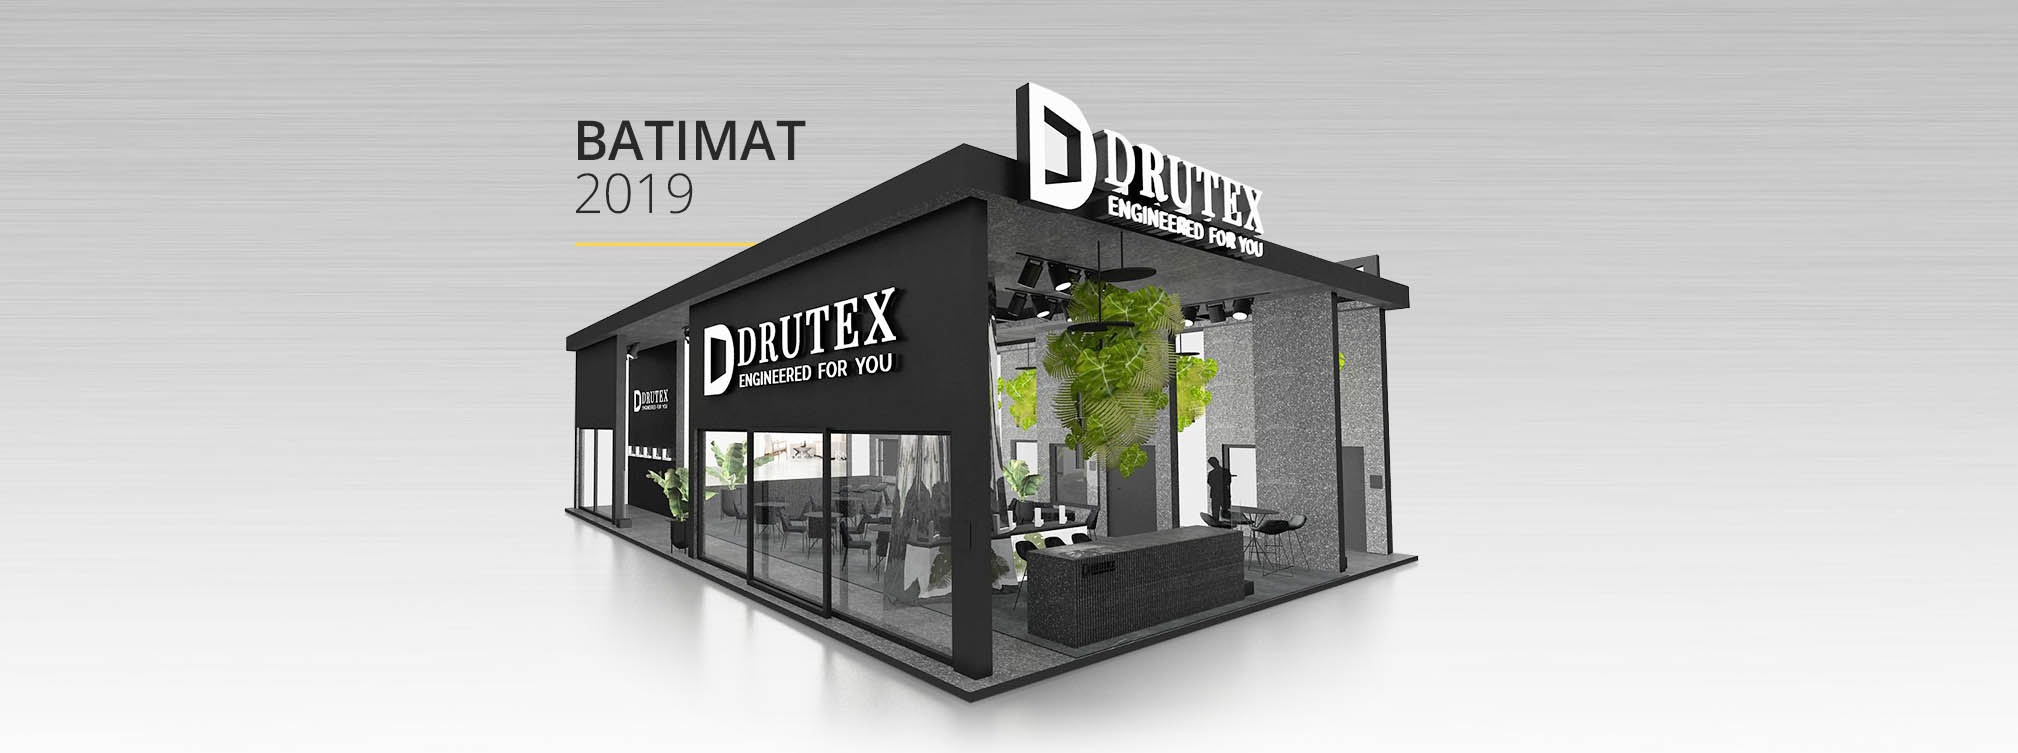 DRUTEX presents its offer at the Batimat  2019 exhibition